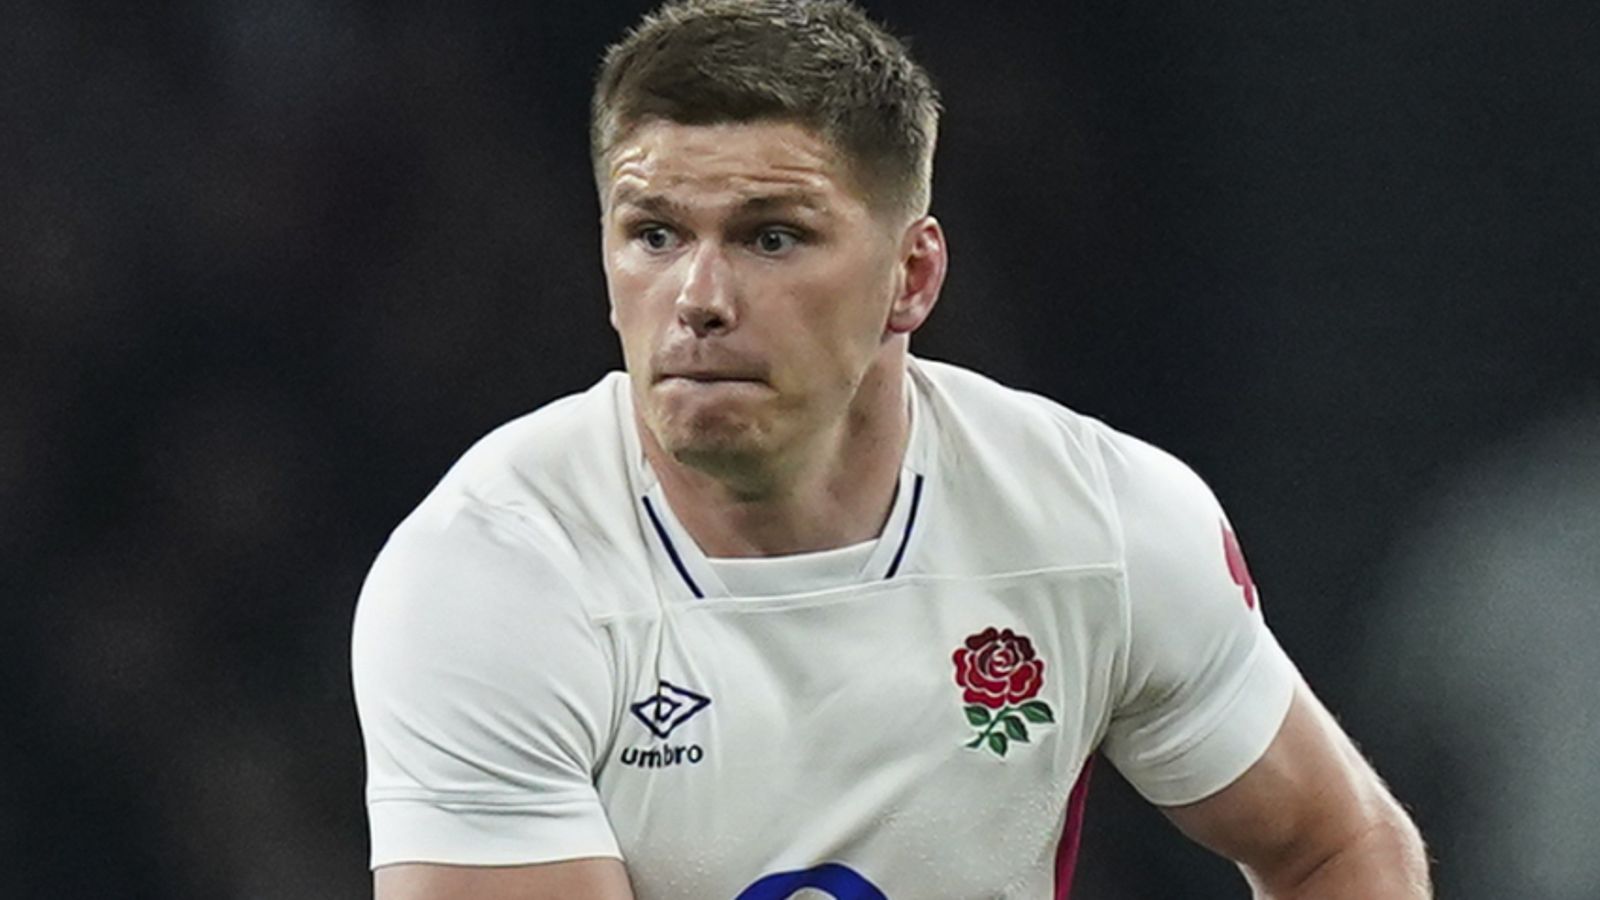 Owen Farrell: England Captain Set To Miss England's Pre Six Nations Training Camp Due To Injury. Rugby Union News